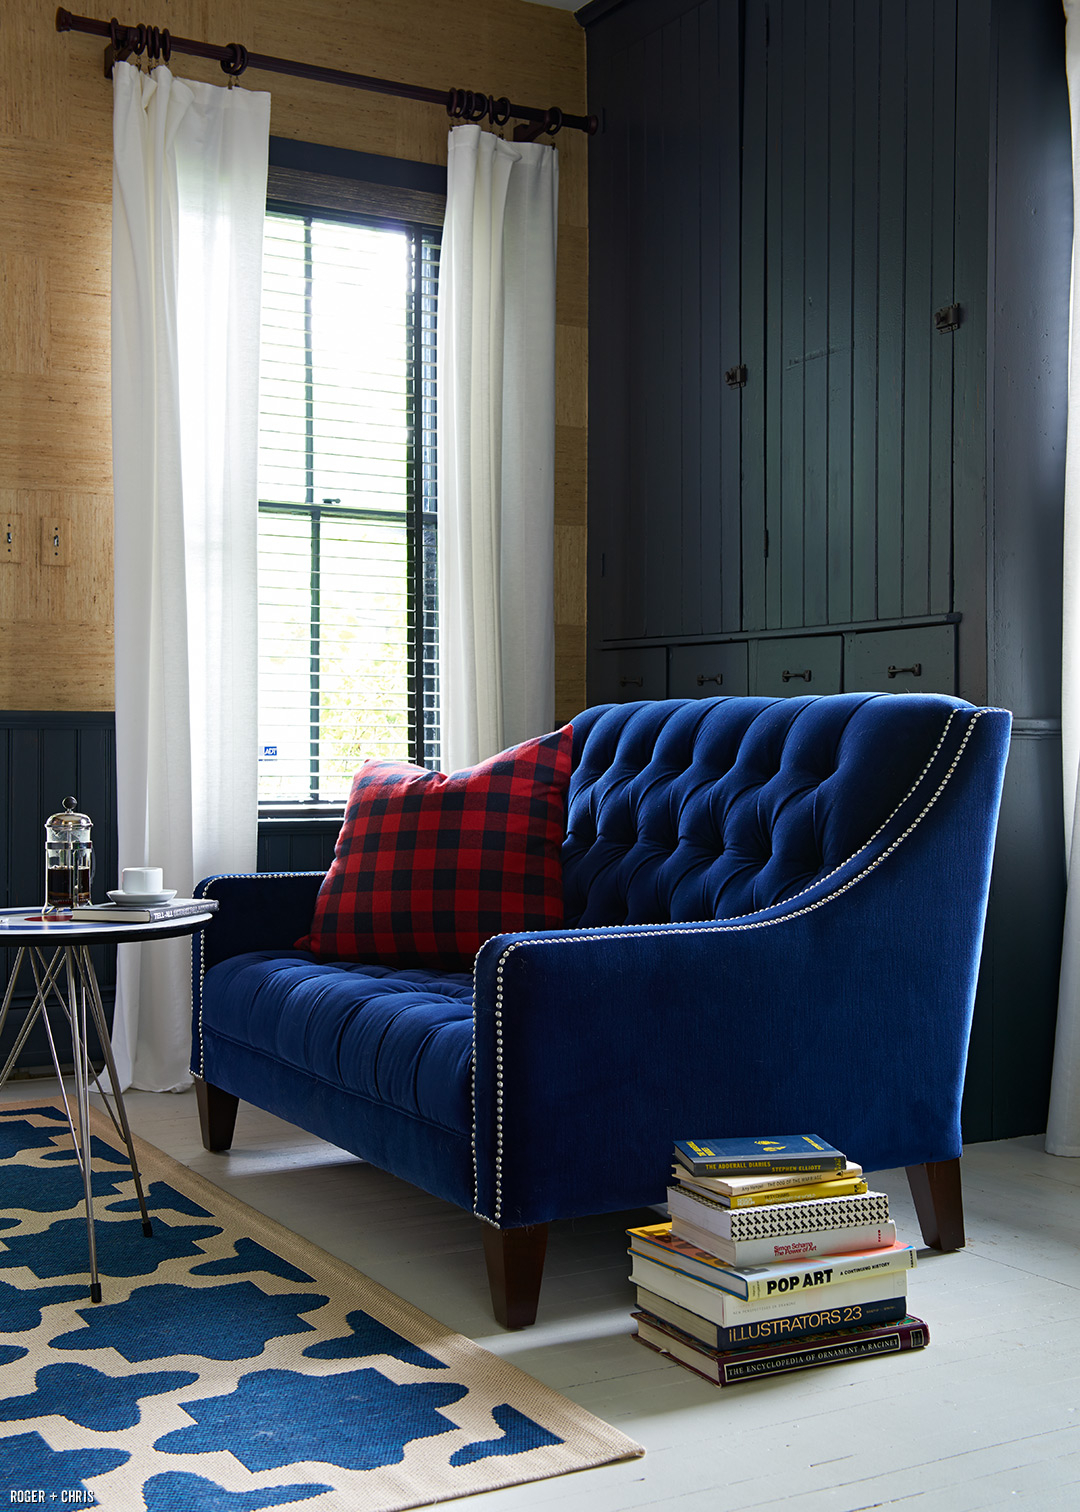 Our tufted Lincoln love seat in blue velvet. Photo by Alec Hemer.